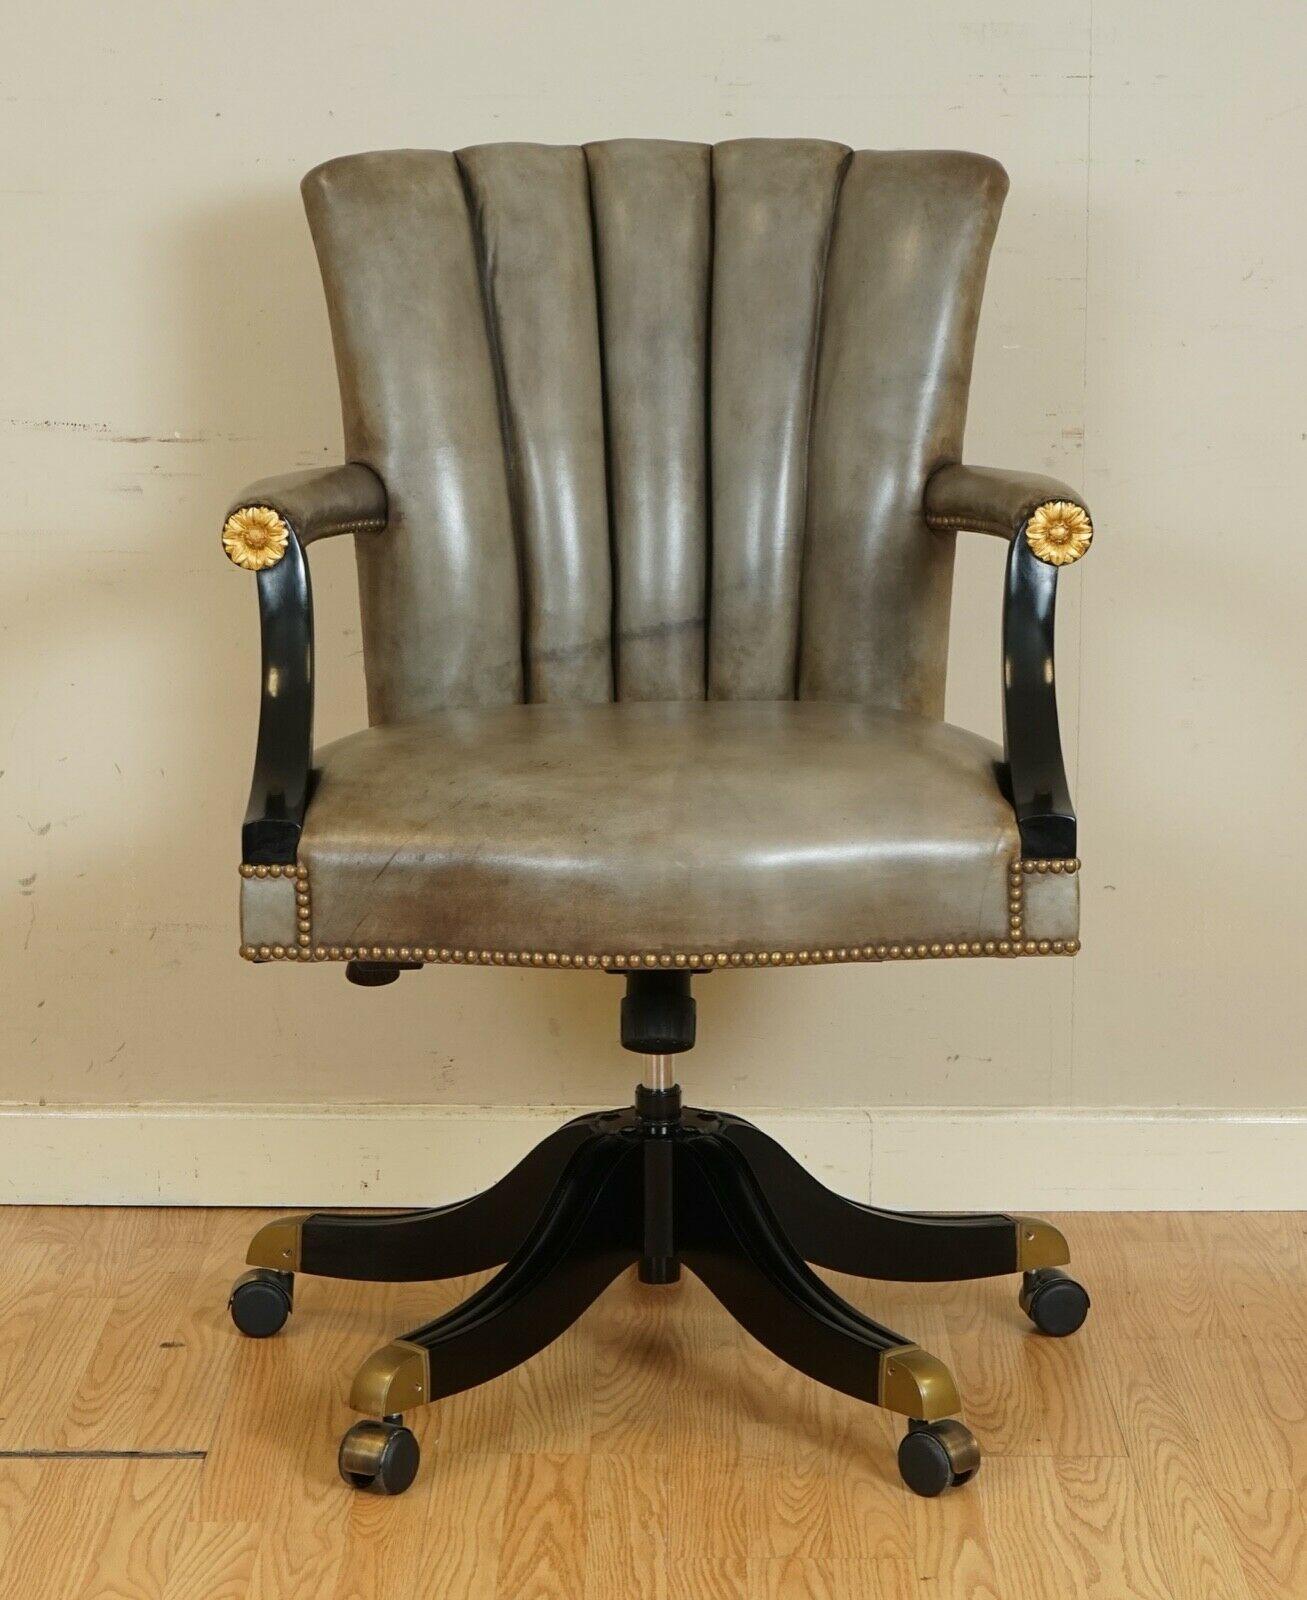 We are delighted to offer this stunning vintage Art Deco shell back leather swivel chair.
A very well made and comfortable chair. The armrest and base are black lacquered with a gold design in front of the armrest. 
These are quite rare I haven't